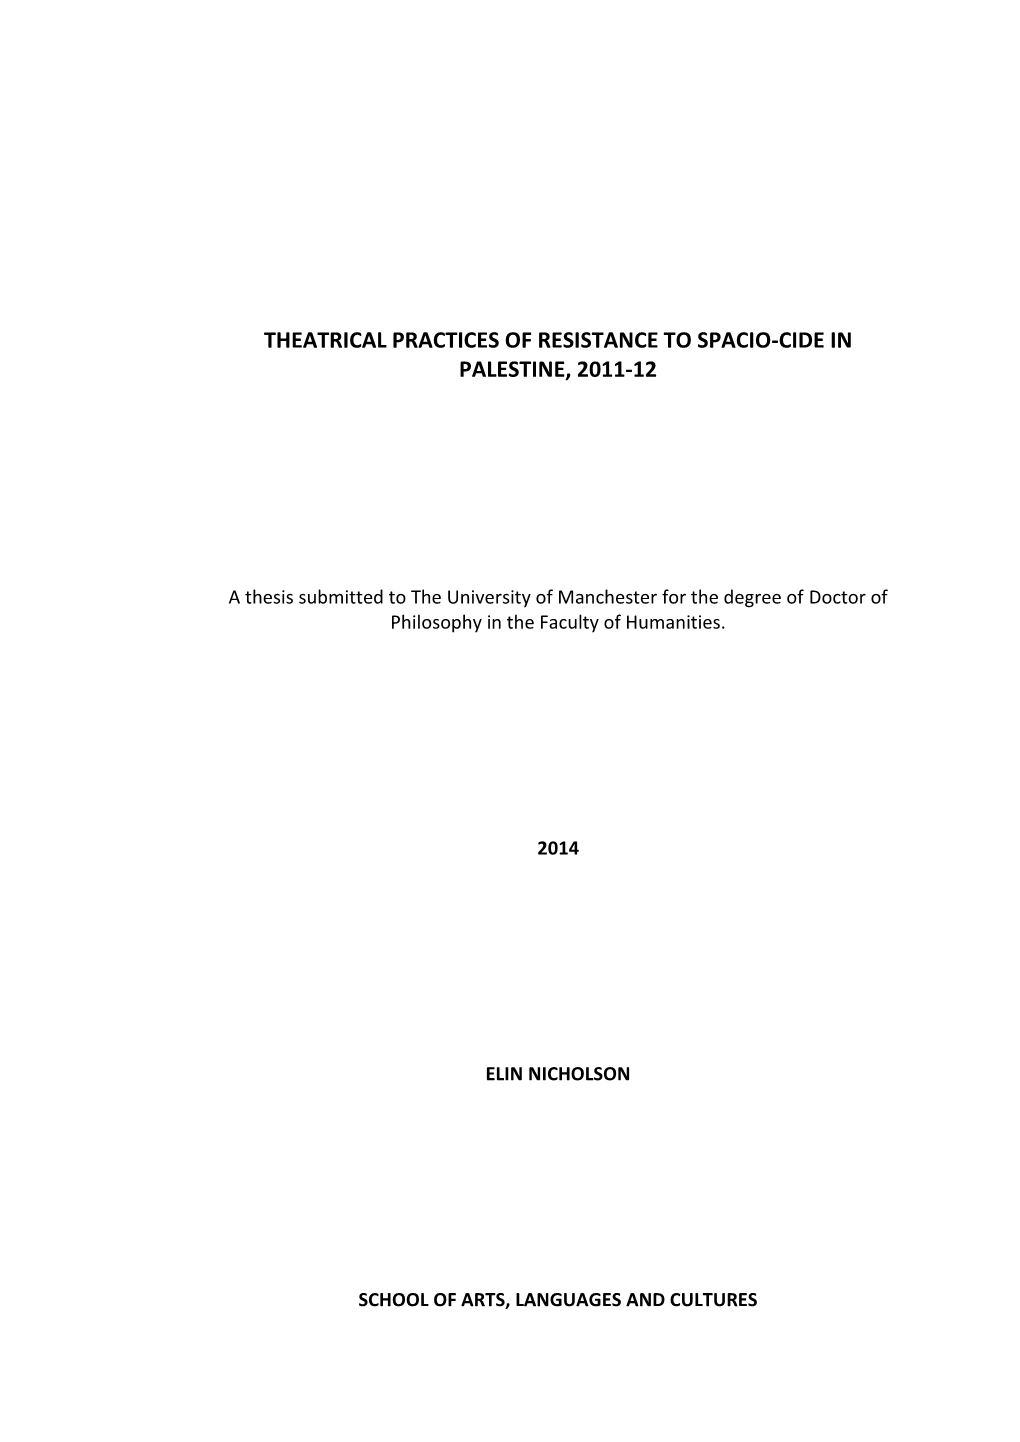 Theatrical Practices of Resistance to Spacio-Cide in Palestine, 2011-12